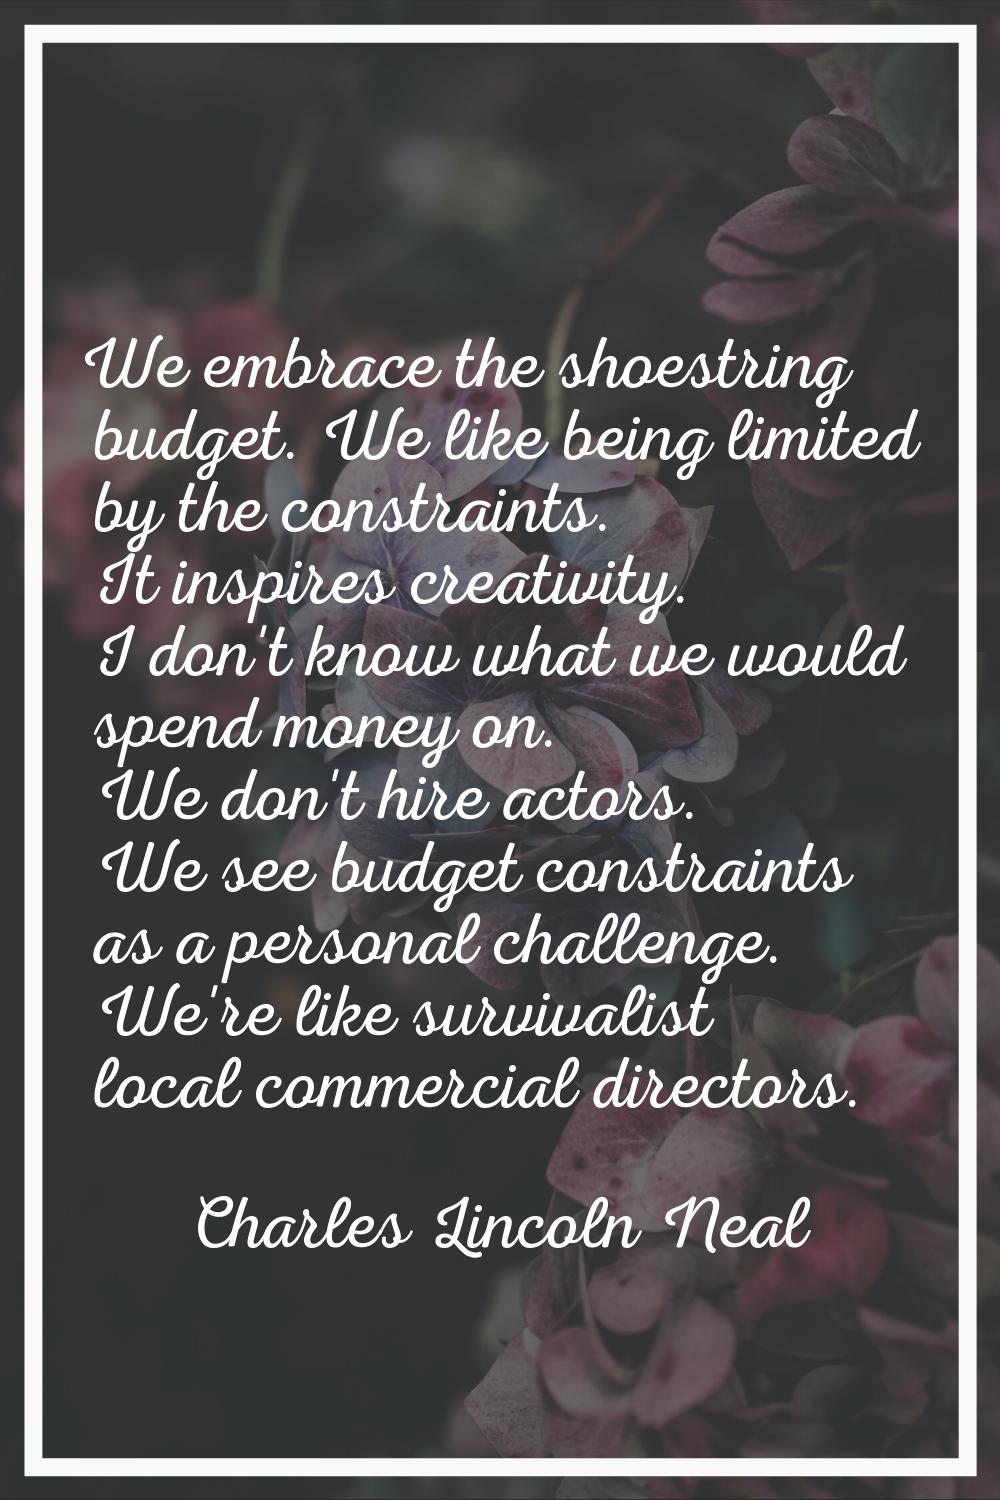 We embrace the shoestring budget. We like being limited by the constraints. It inspires creativity.